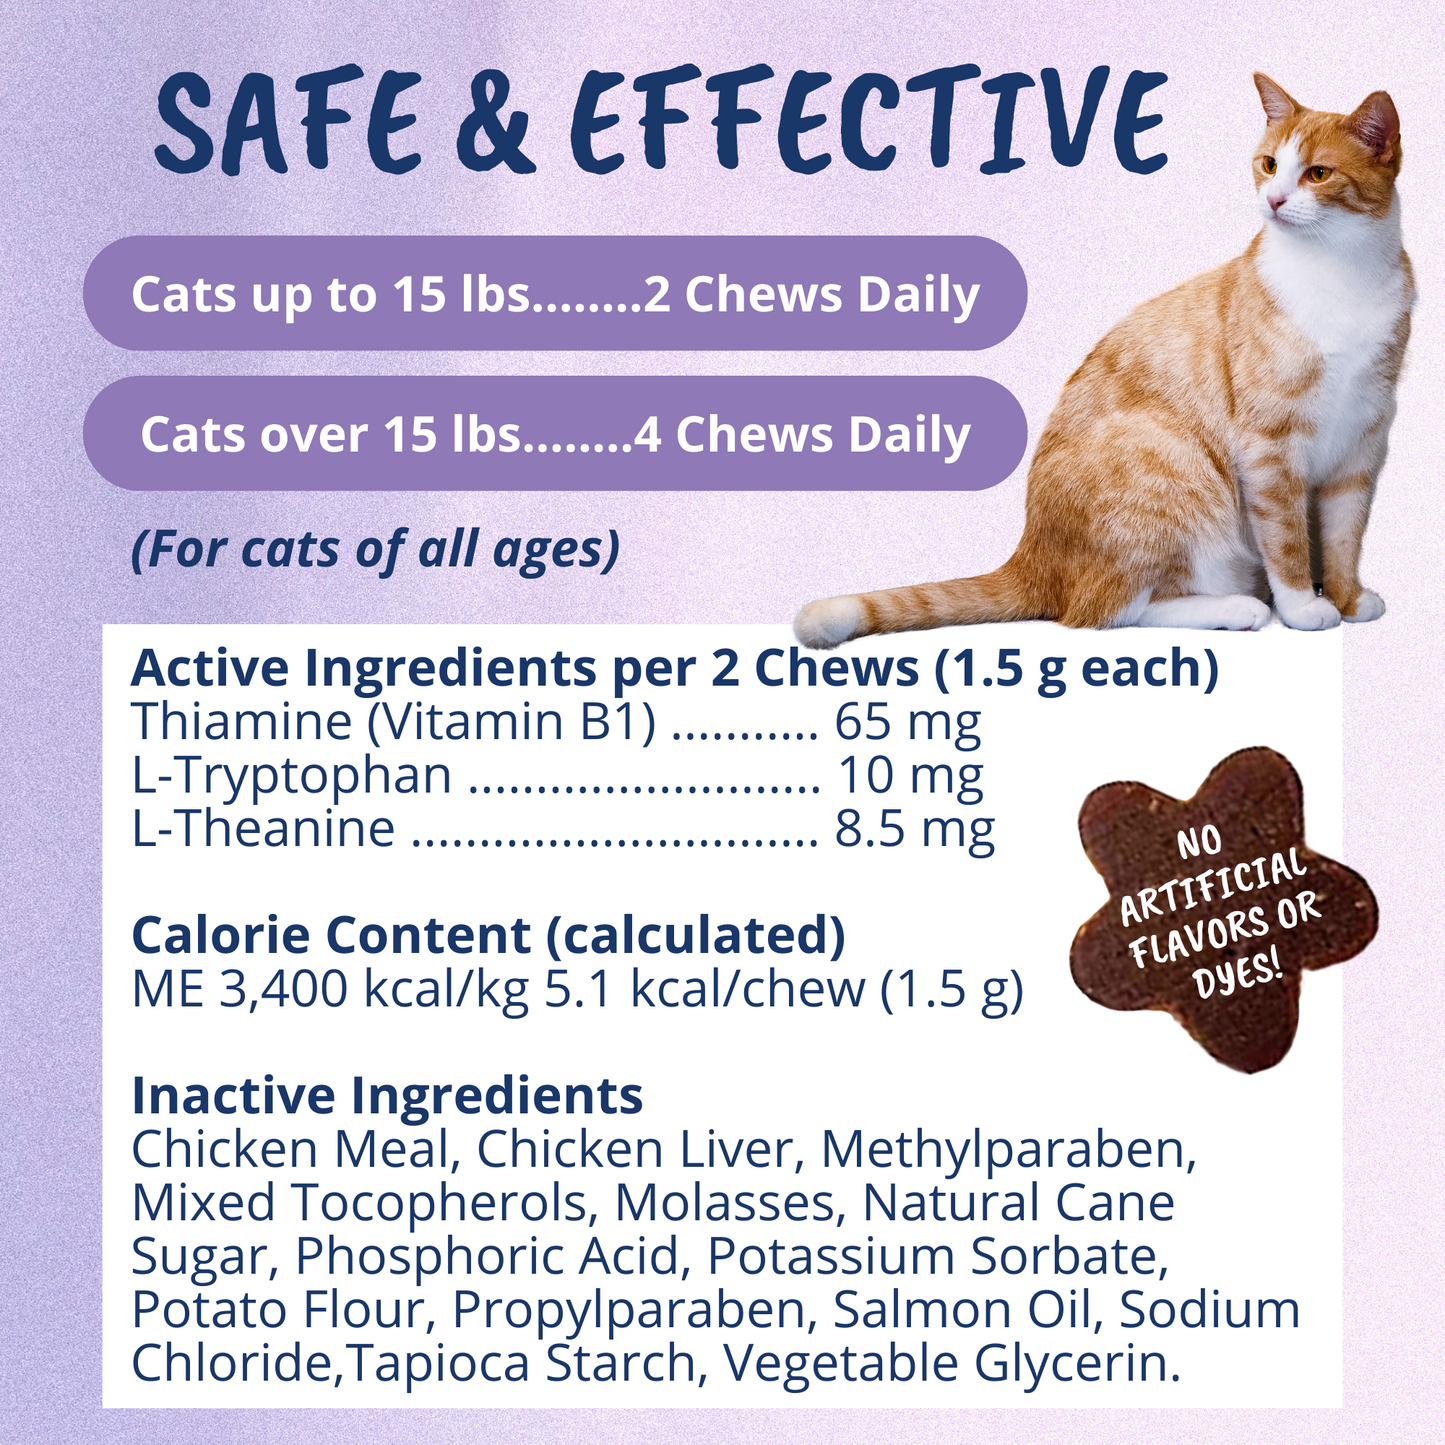 Calming Soft Chews for Cats